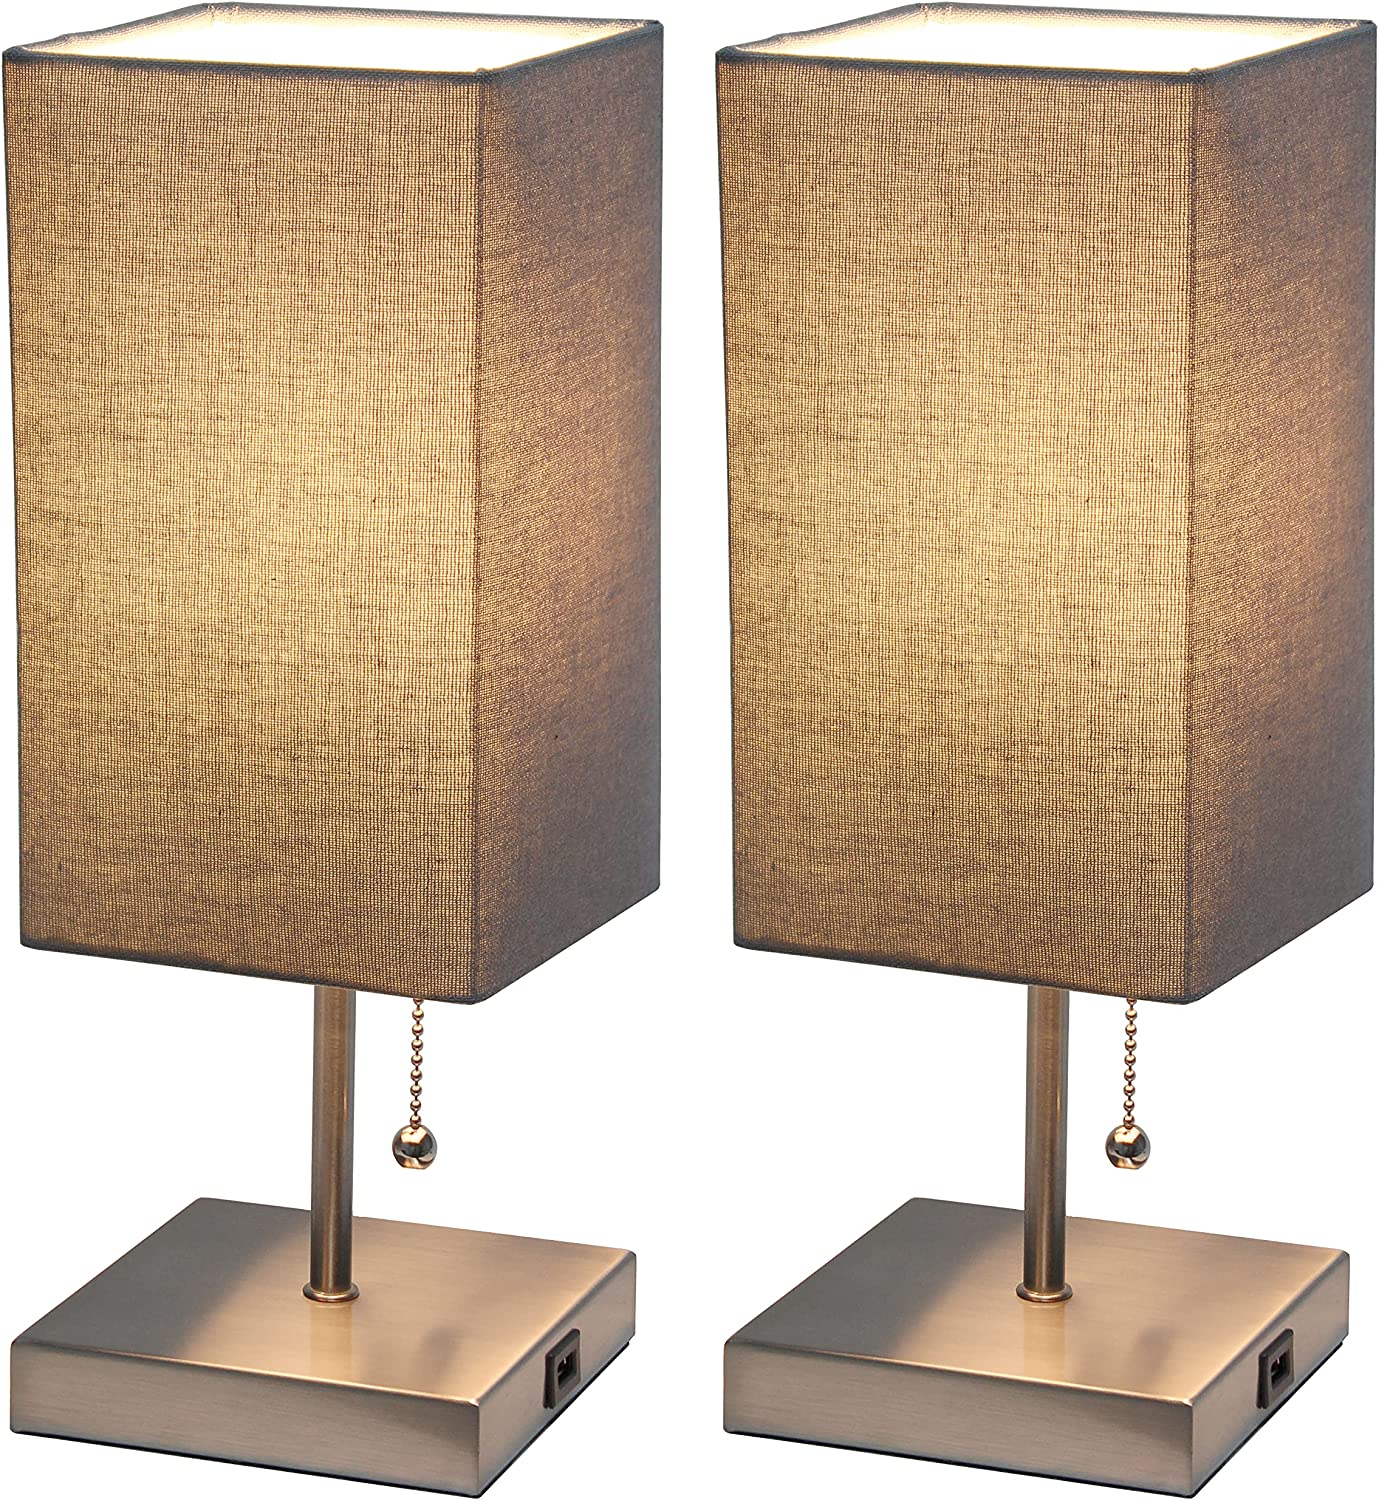 Simple Designs LC2003-GRY-2PK Lamp Set, Brushed Steel/Gray